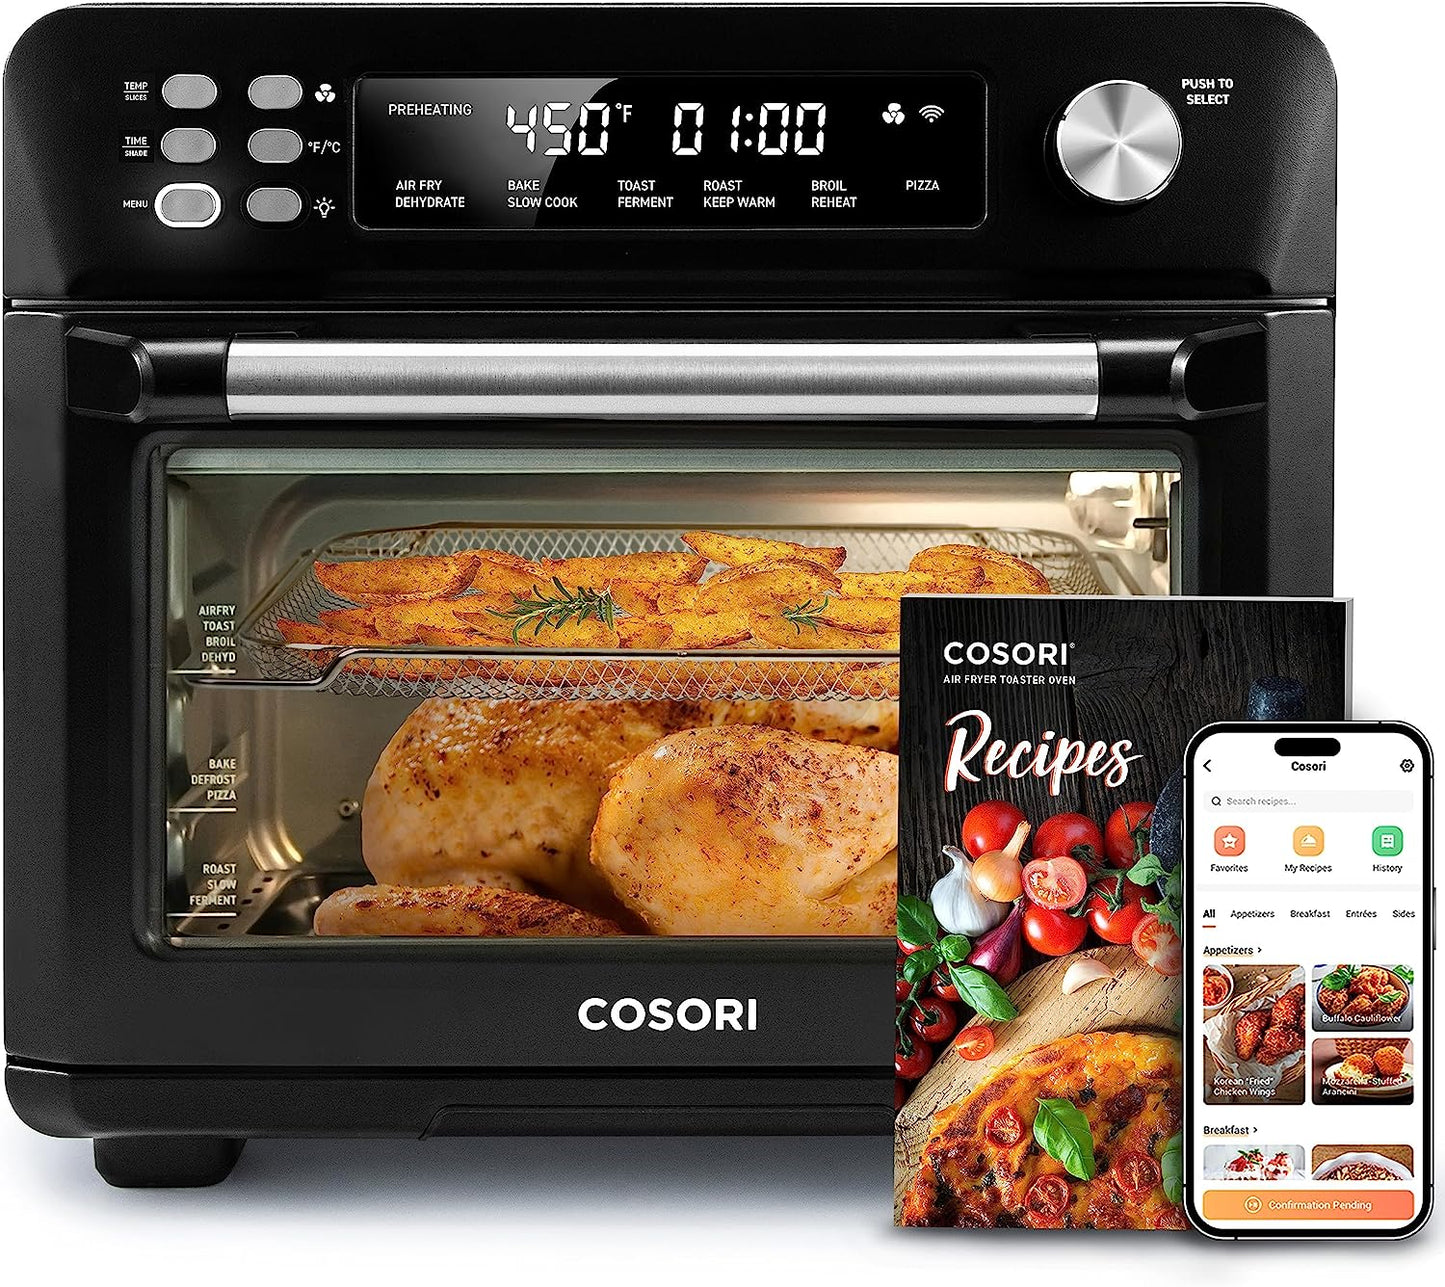 COSORI Smart 12-in-1 Air Fryer Toaster Oven Combo, Airfryer Convection Oven Countertop, Bake, Roast, Reheat, Broiler, Dehydrate, 75 Recipes & 3 Accessories, 26QT, Black-Stainless Steel